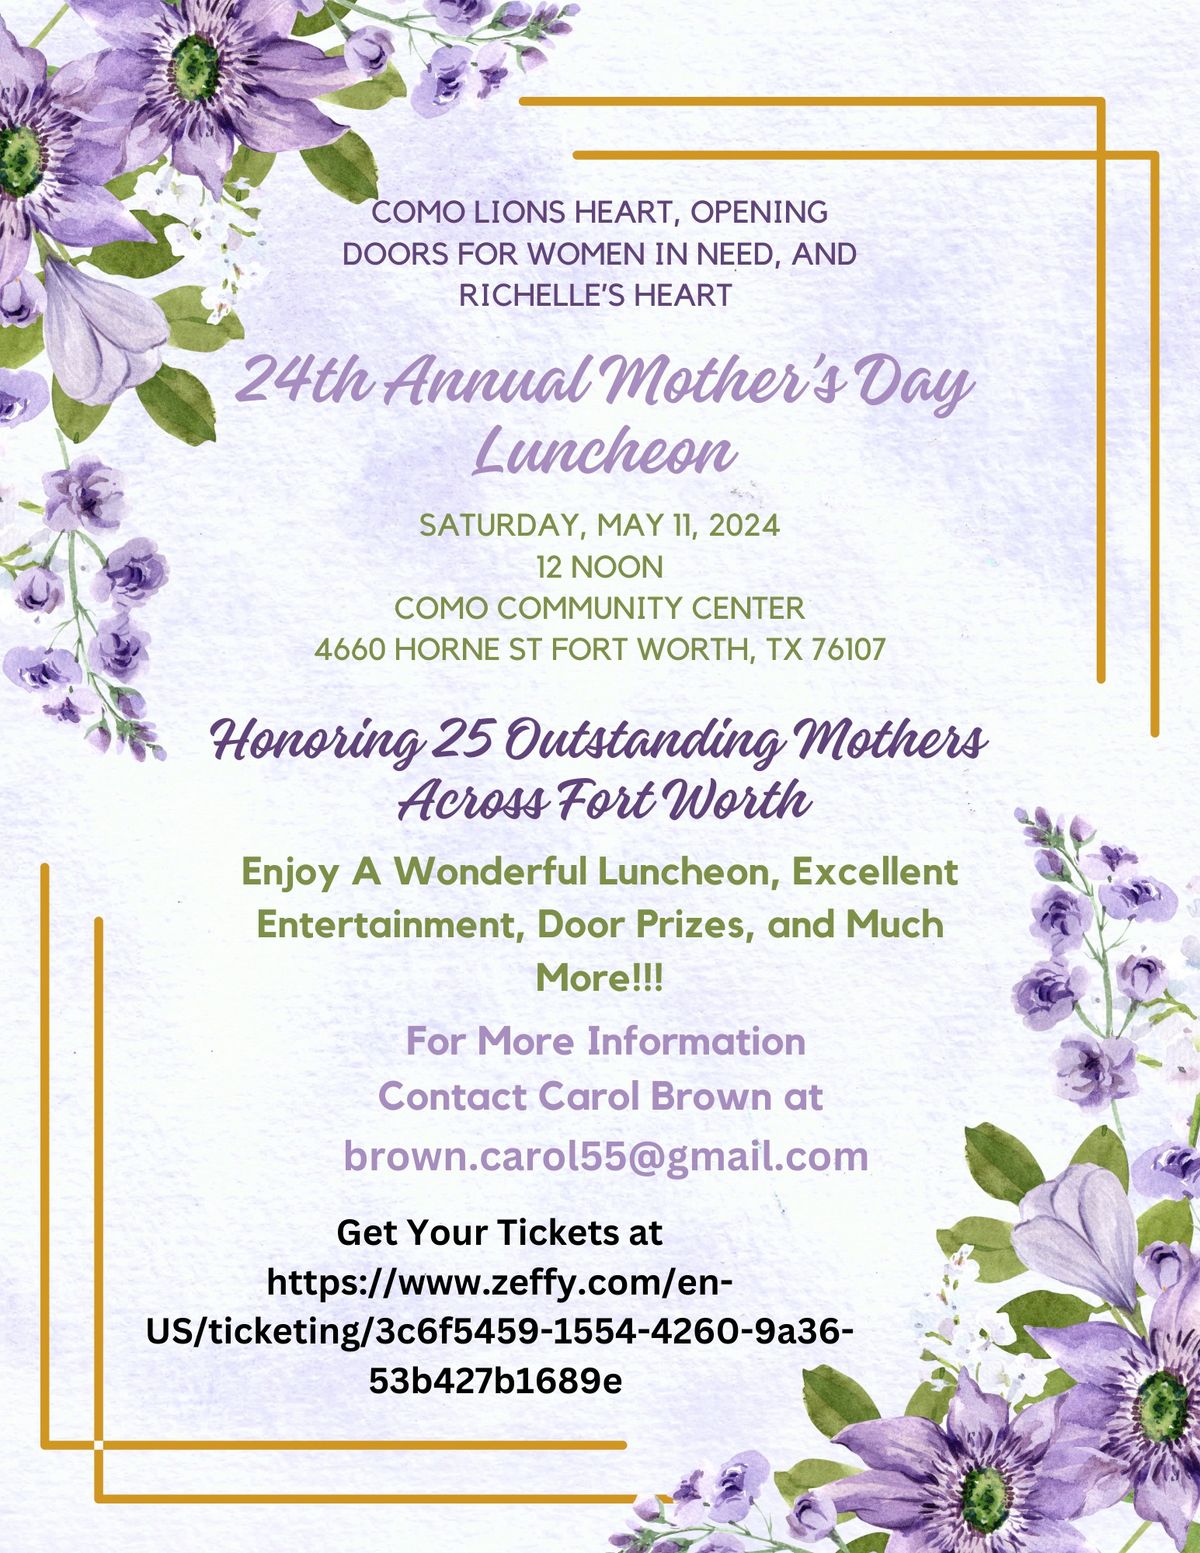 24th Annual Mother's Day Luncheon